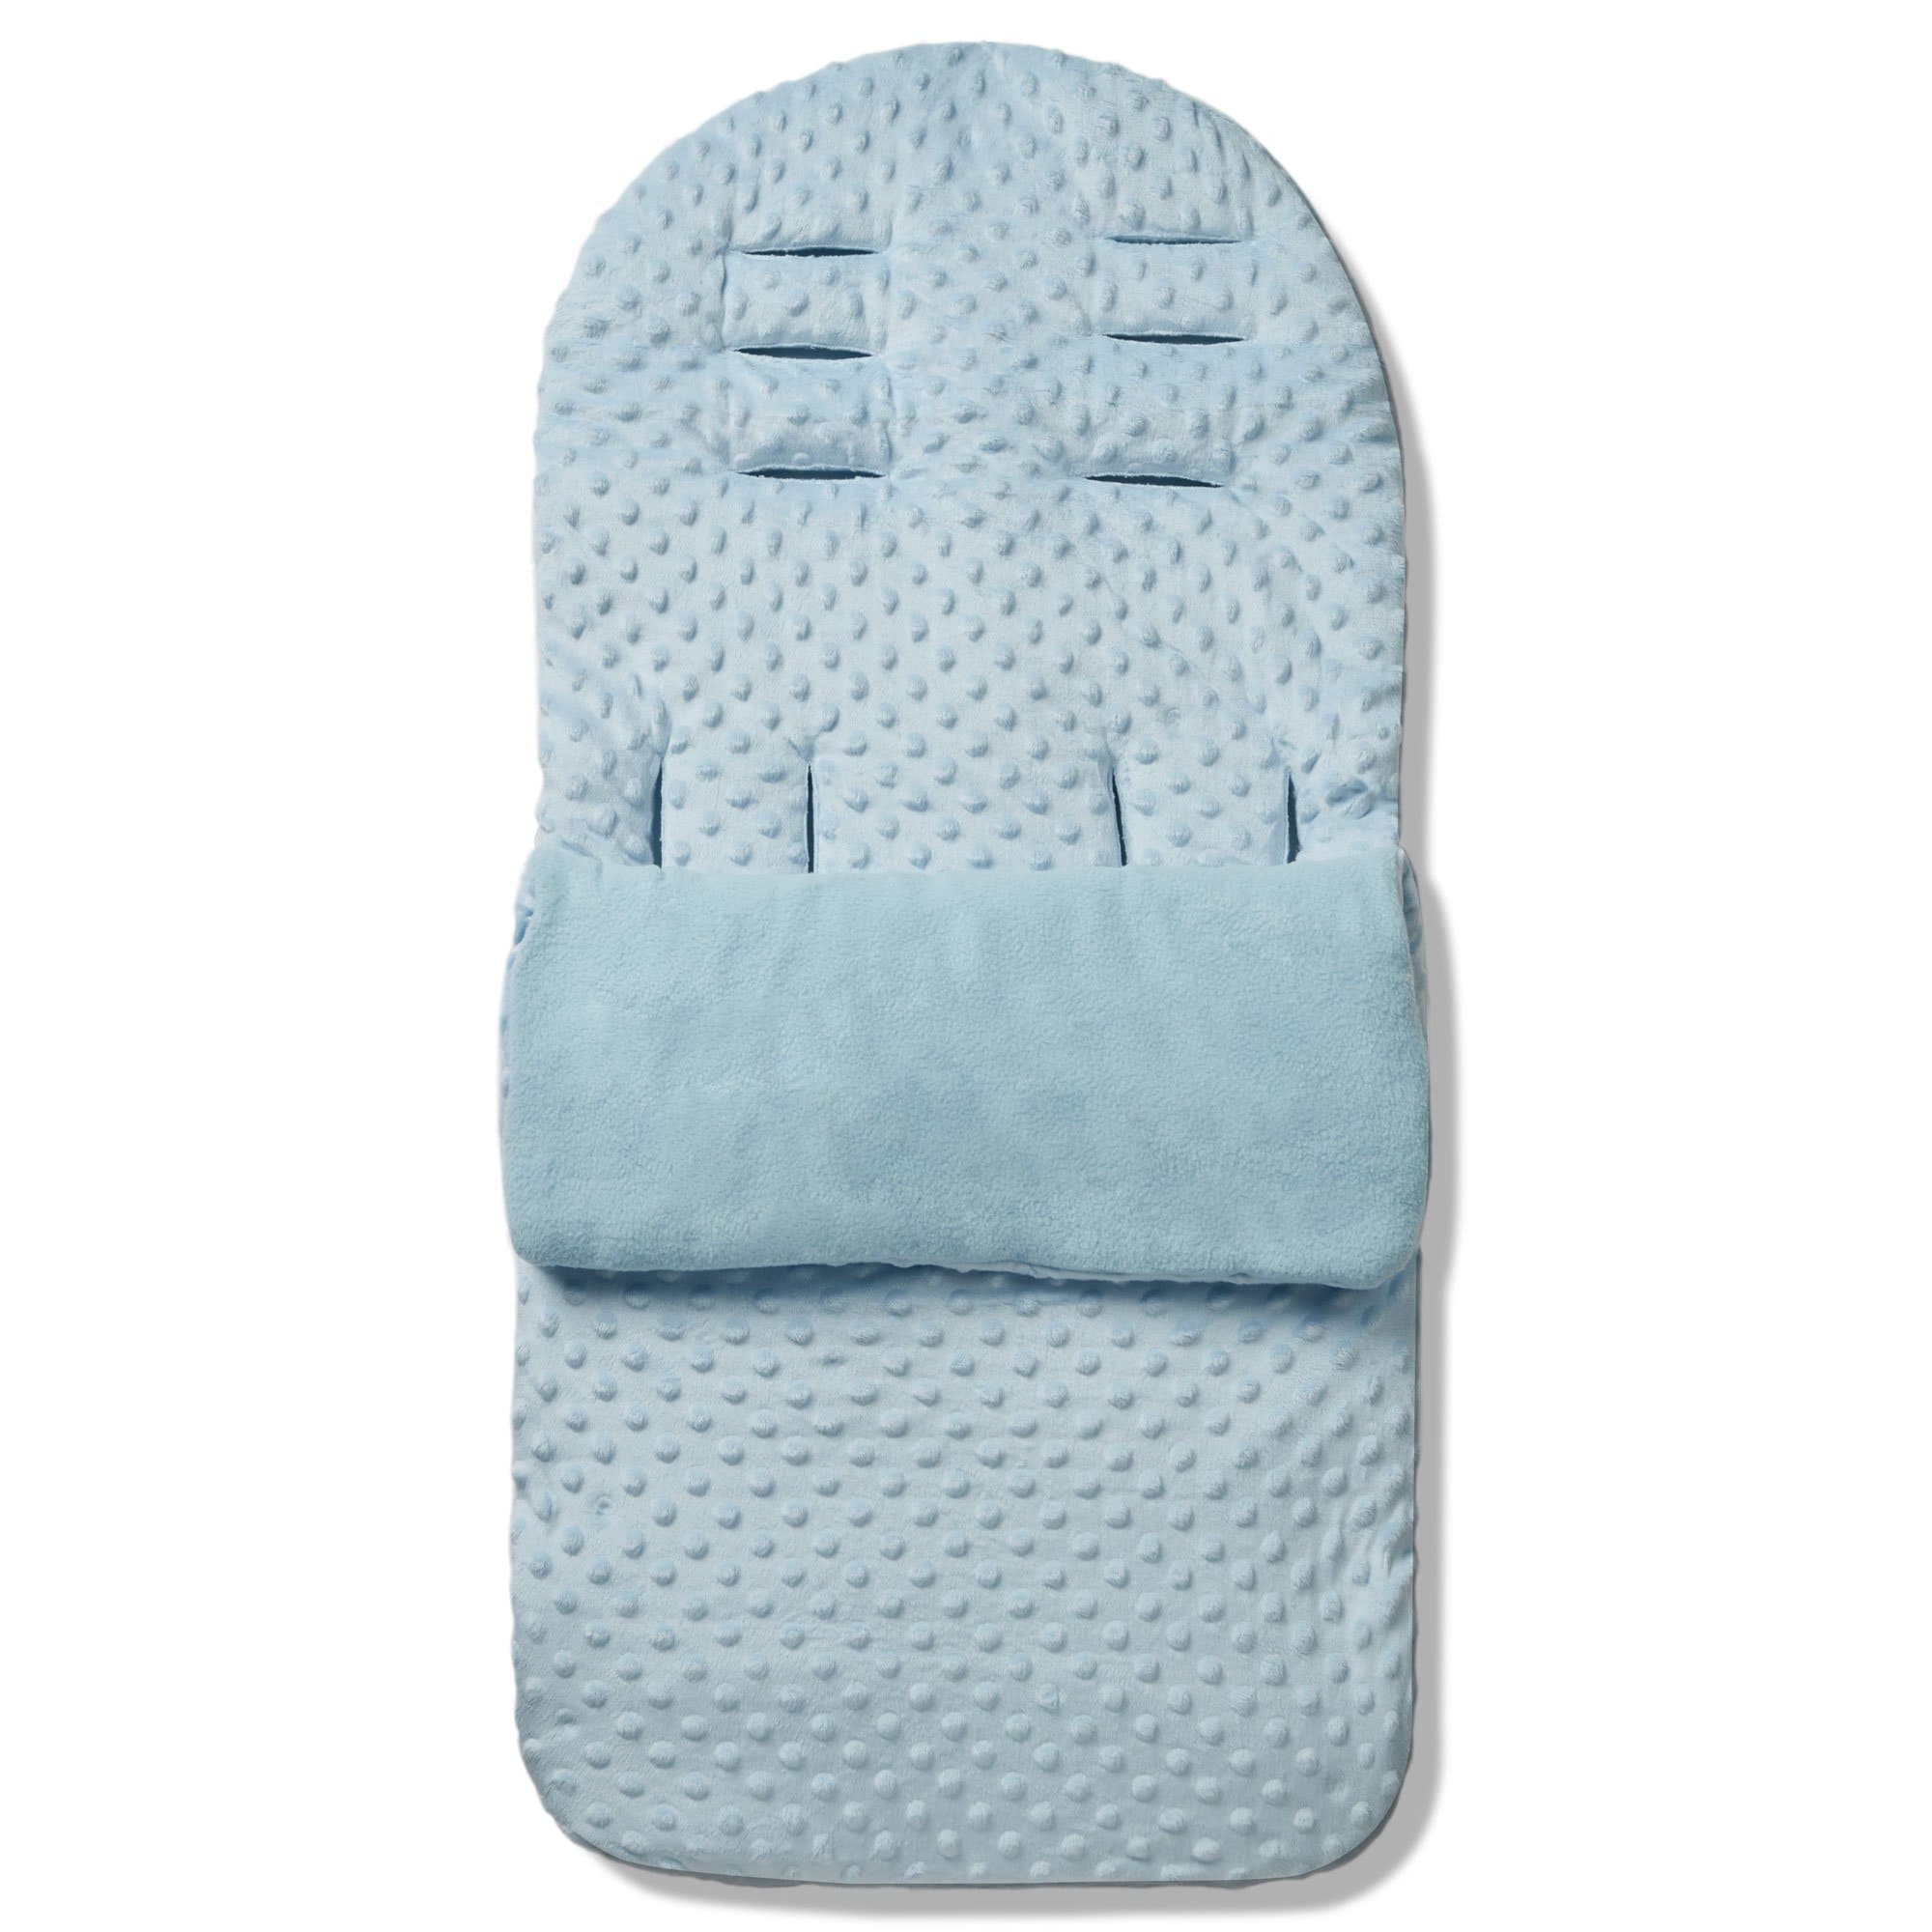 Dimple Footmuff / Cosy Toes Compatible with Joolz - Blue / Fits All Models | For Your Little One